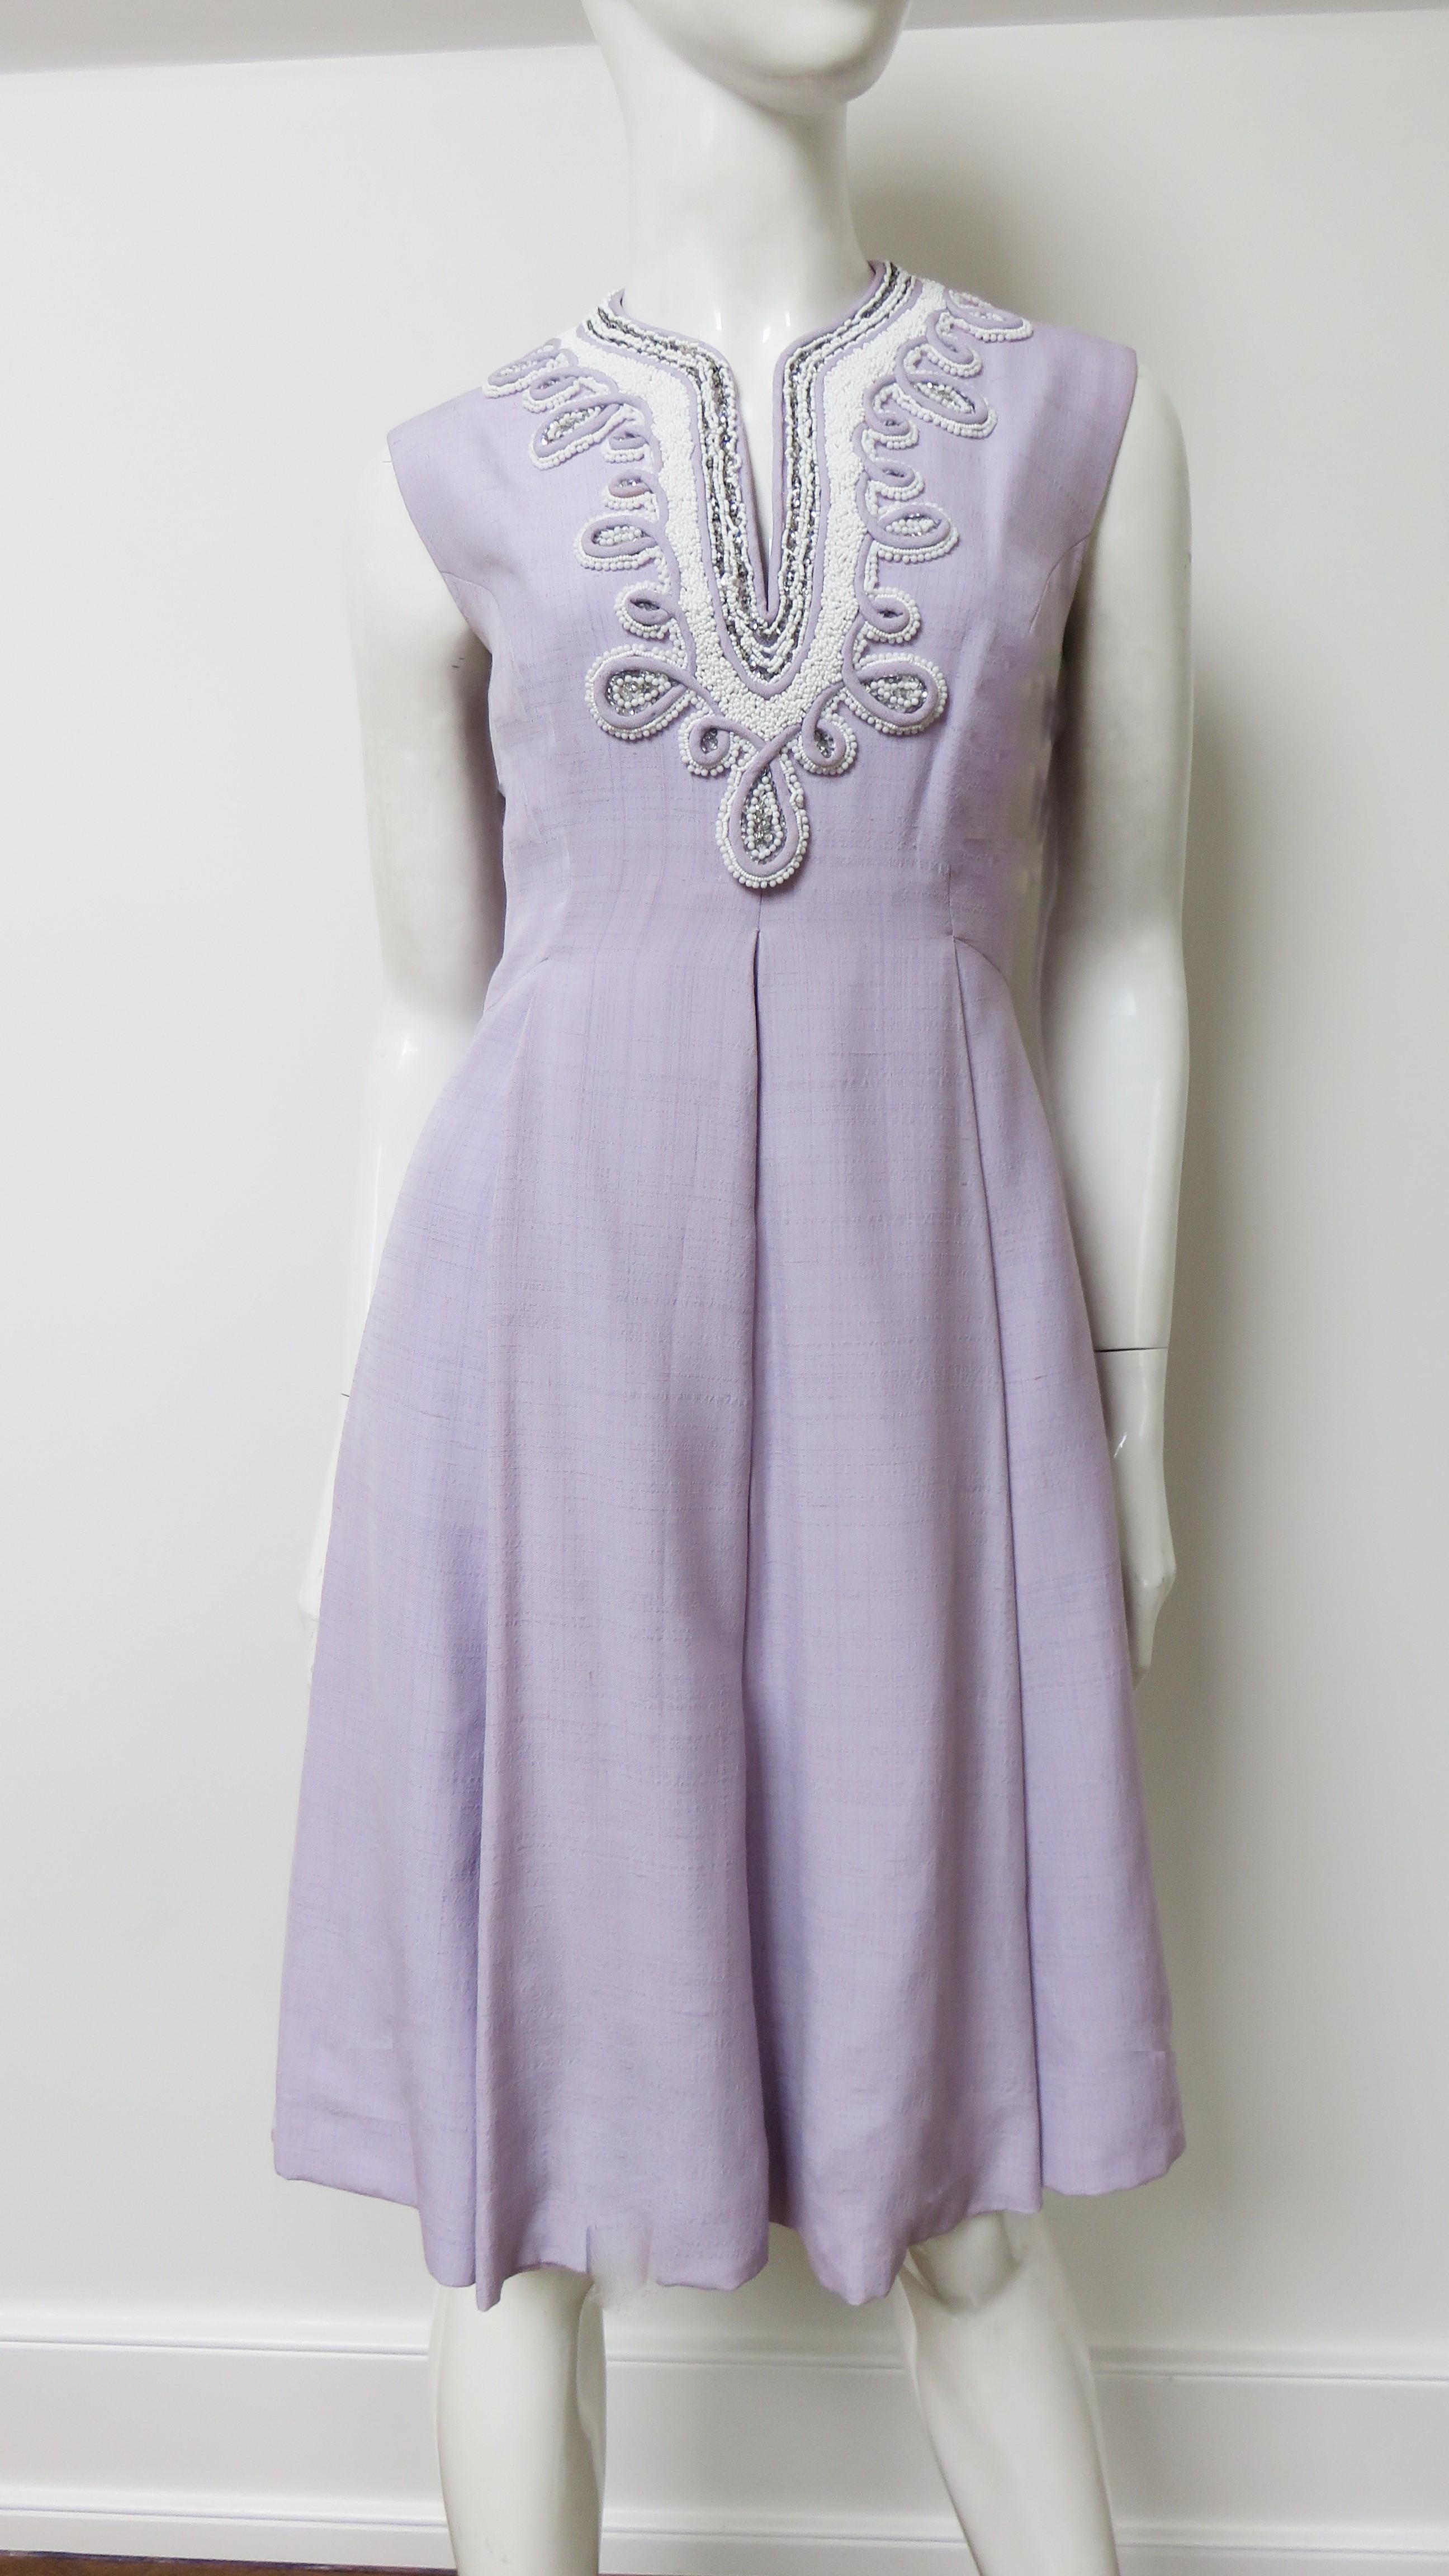 A gorgeous lavender silk dress made in 1960s British Hon Kong.  It is sleeveless with a V neckline elaborately detailed in loops of piping highlighted with rows of white glass beads. It is fully lined with a back metal zipper.
Fits sizes Small,